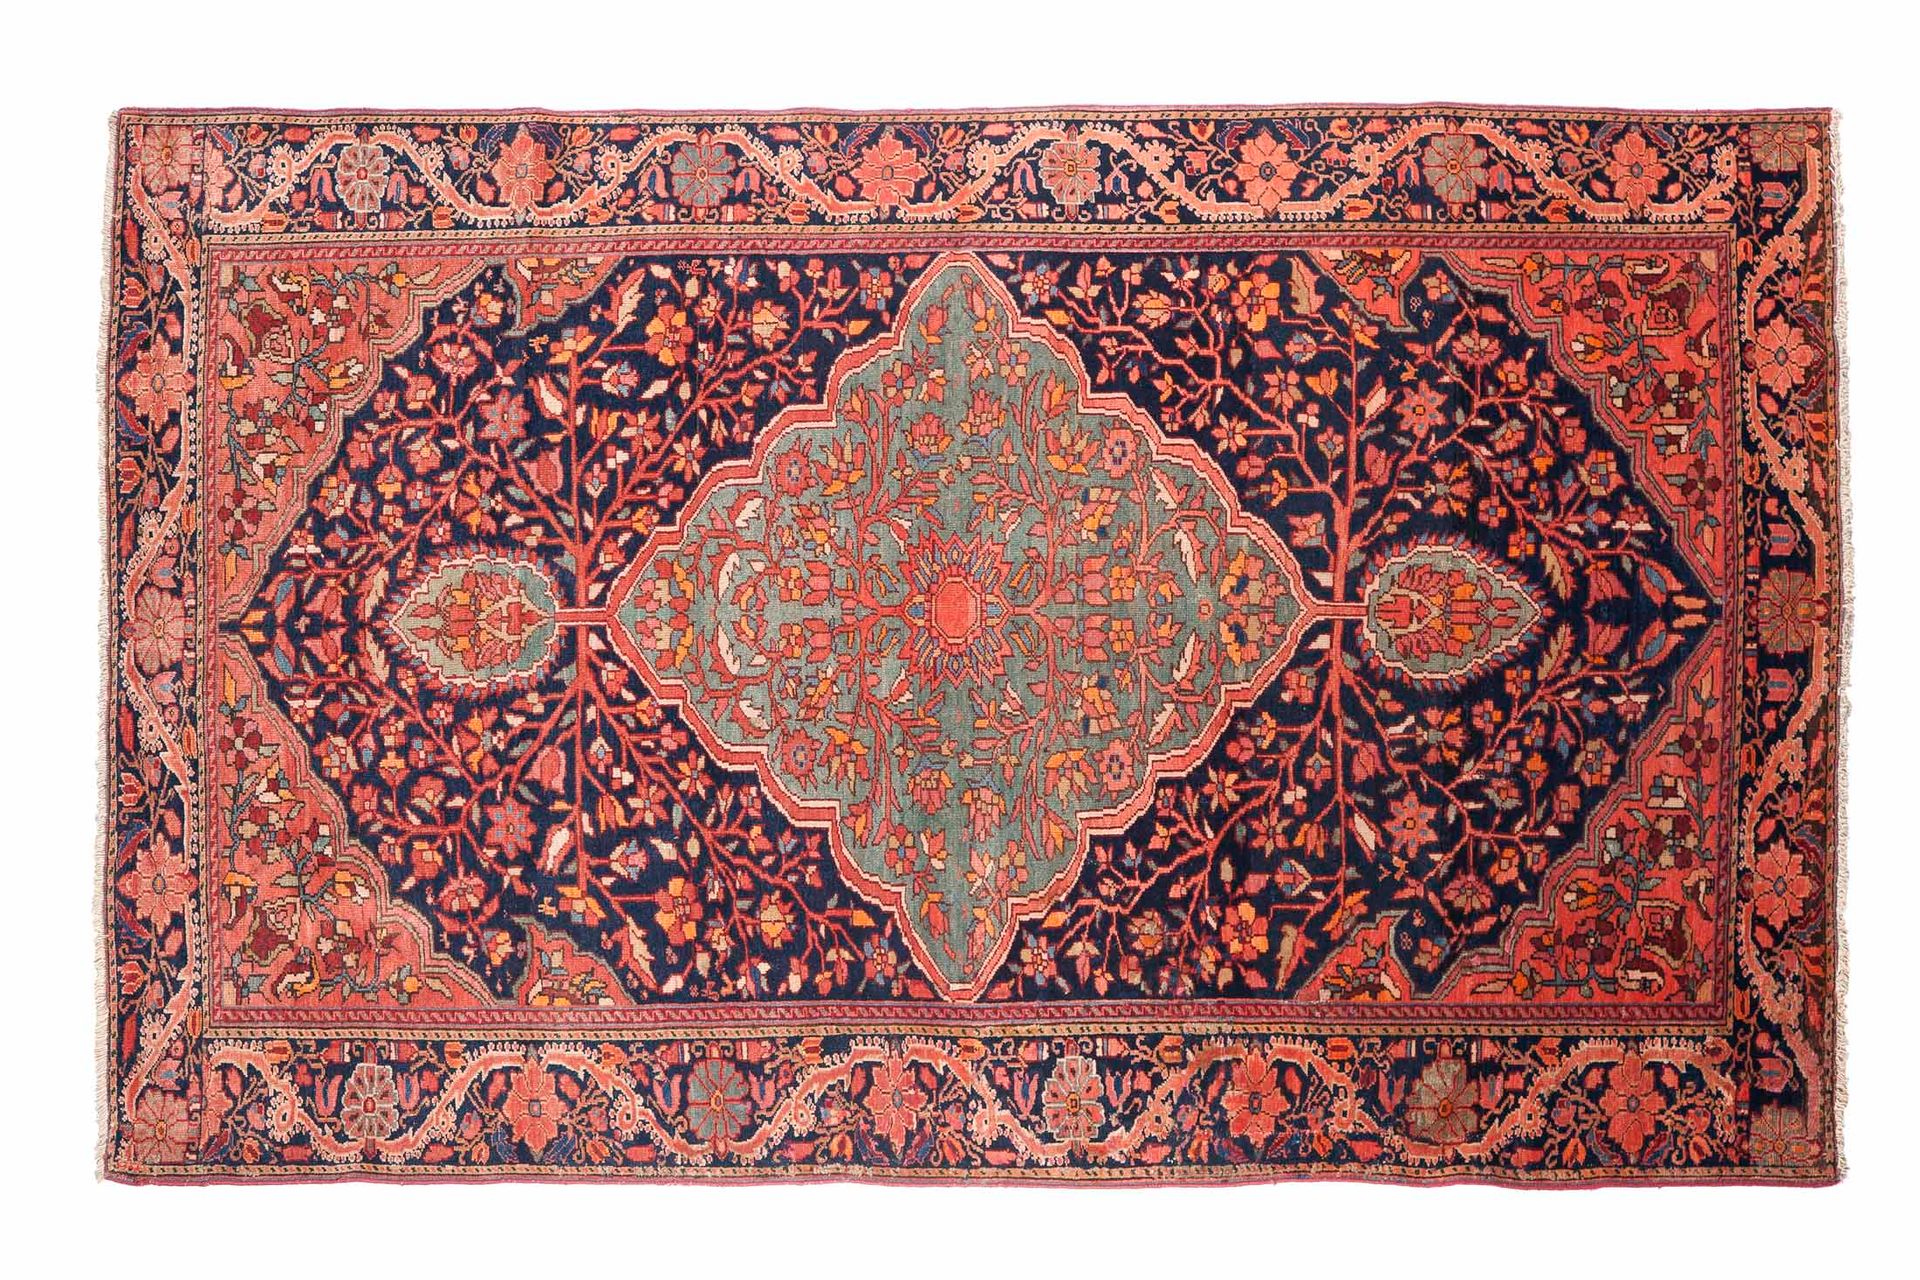 Null MELAYER carpet (Persia), end of the 19th century

Dimensions : 200 x 135cm.&hellip;